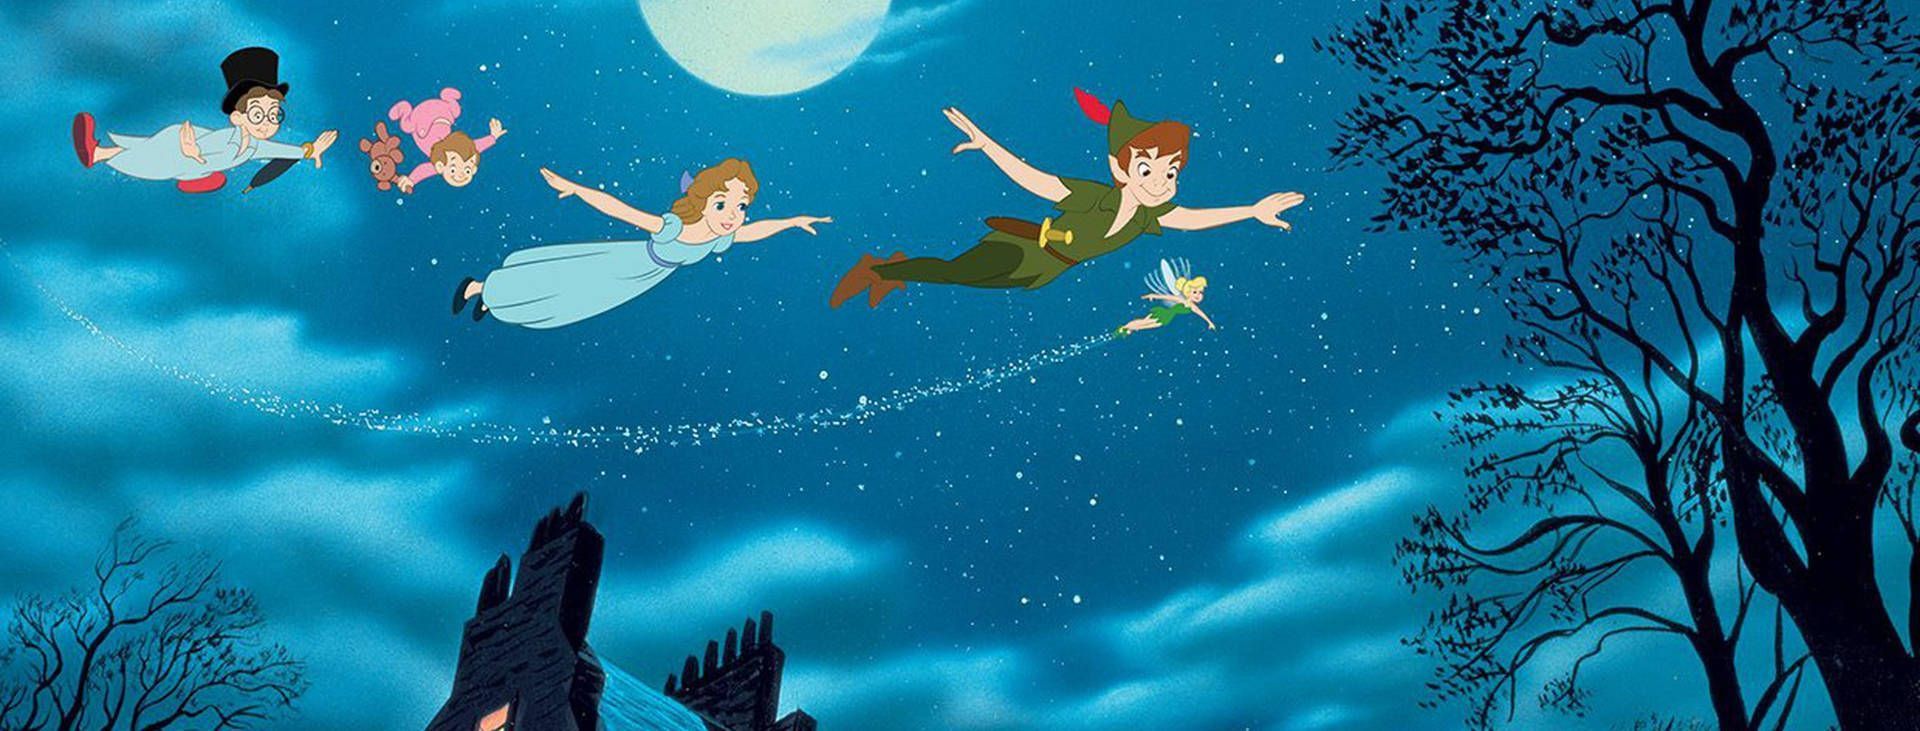 Download Tinker Bell With Peter Pan Wallpaper